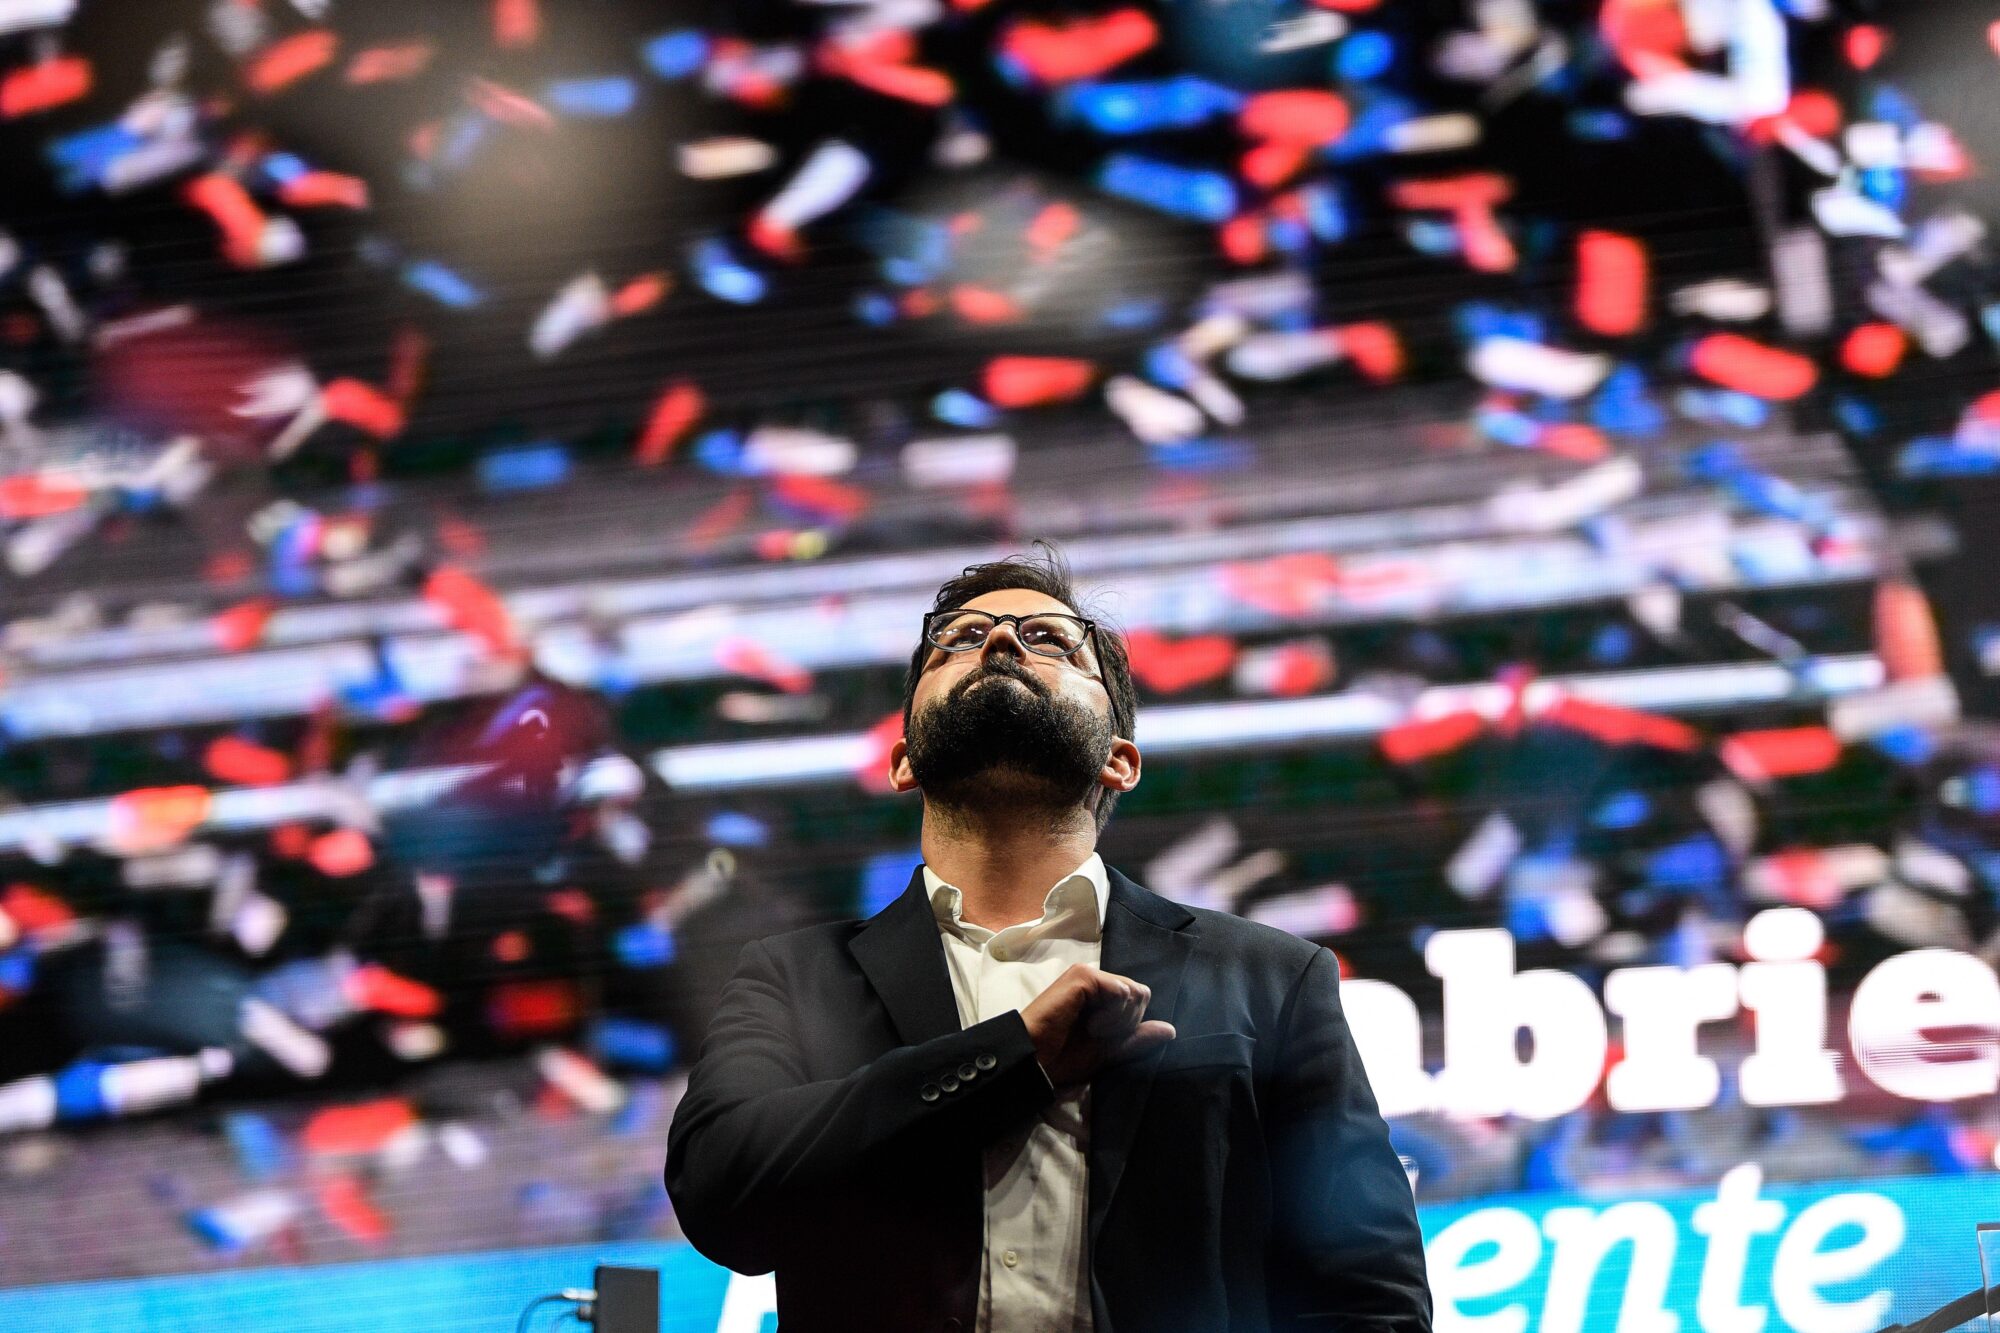 <p>Chile&#8217;s president-elect Gabriel Boric celebrates at a public event in Santiago, after winning the 19 December election. The young left-wing candidate&#8217;s moves on the environment and regional relations in his first year in office are likely to be one of the most closely watched stories in Latin America in 2022. (Image: Jorge Villegas / Alamy)</p>